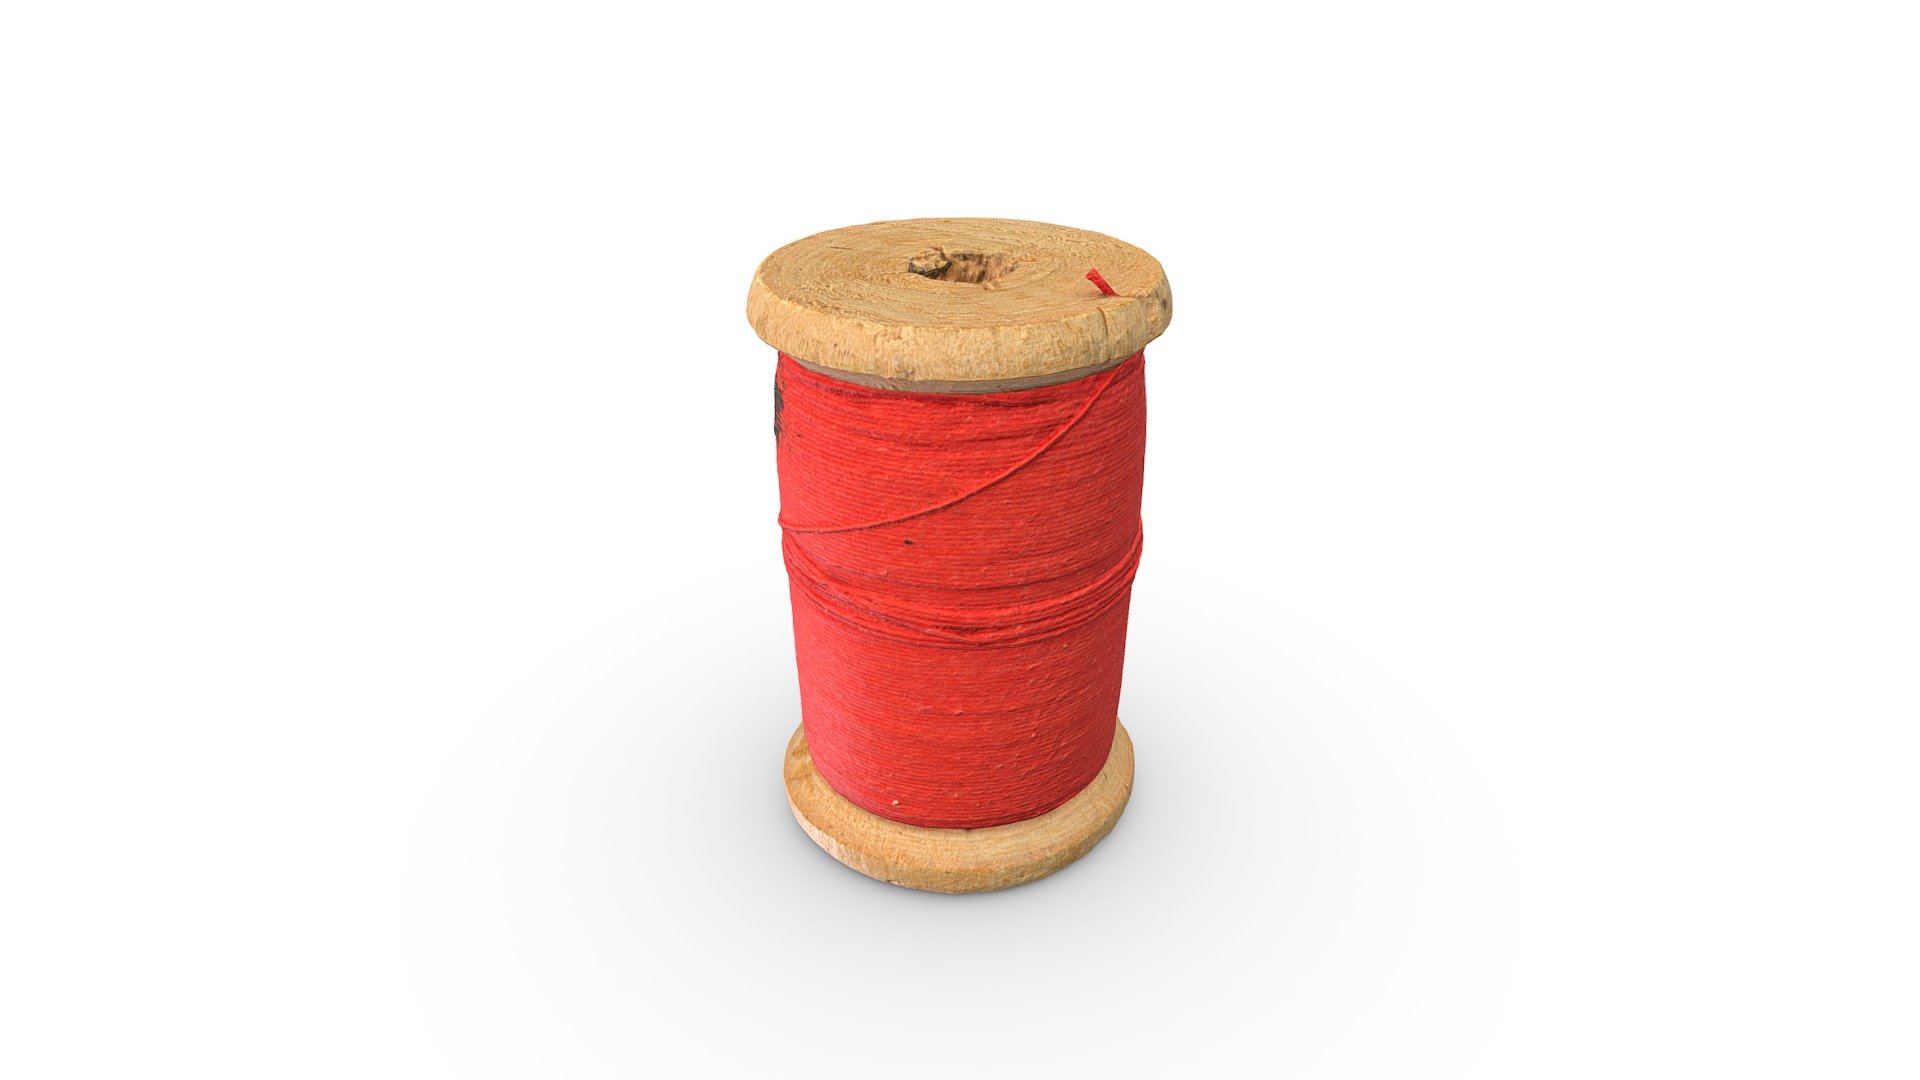 High-poly red threads photogrammetry scan. PBR texture maps 4096x4096 px. resolution for metallic or specular workflow. Scan from real threads, high-poly 3D model, 4K resolution textures.

Additional file contains source PNG &amp; JPEG texture maps and Low-poly 3d model version 3d model